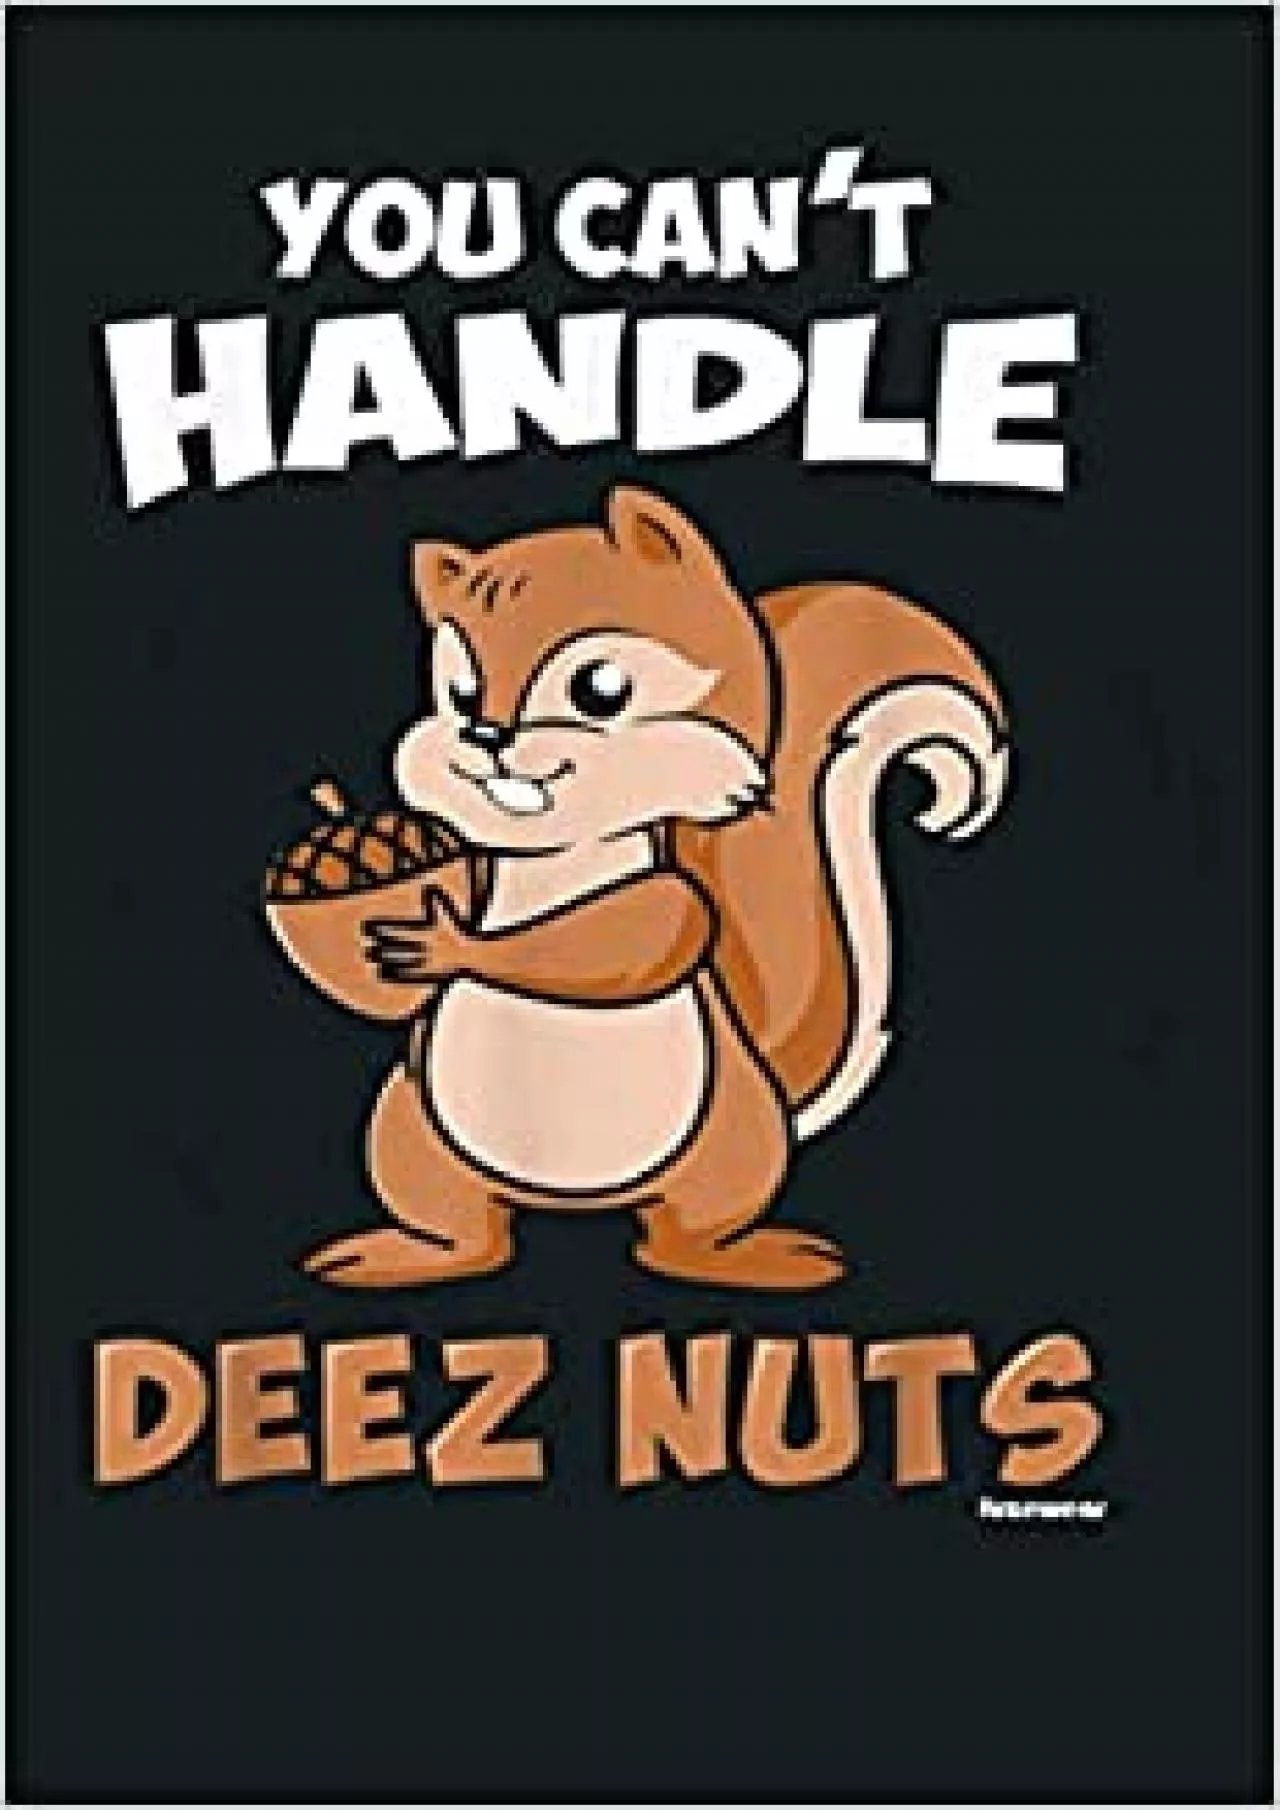 You Can T Handle Deez Nuts: Notebook Planner - 6x9 inch Daily Planner Journal To Do List